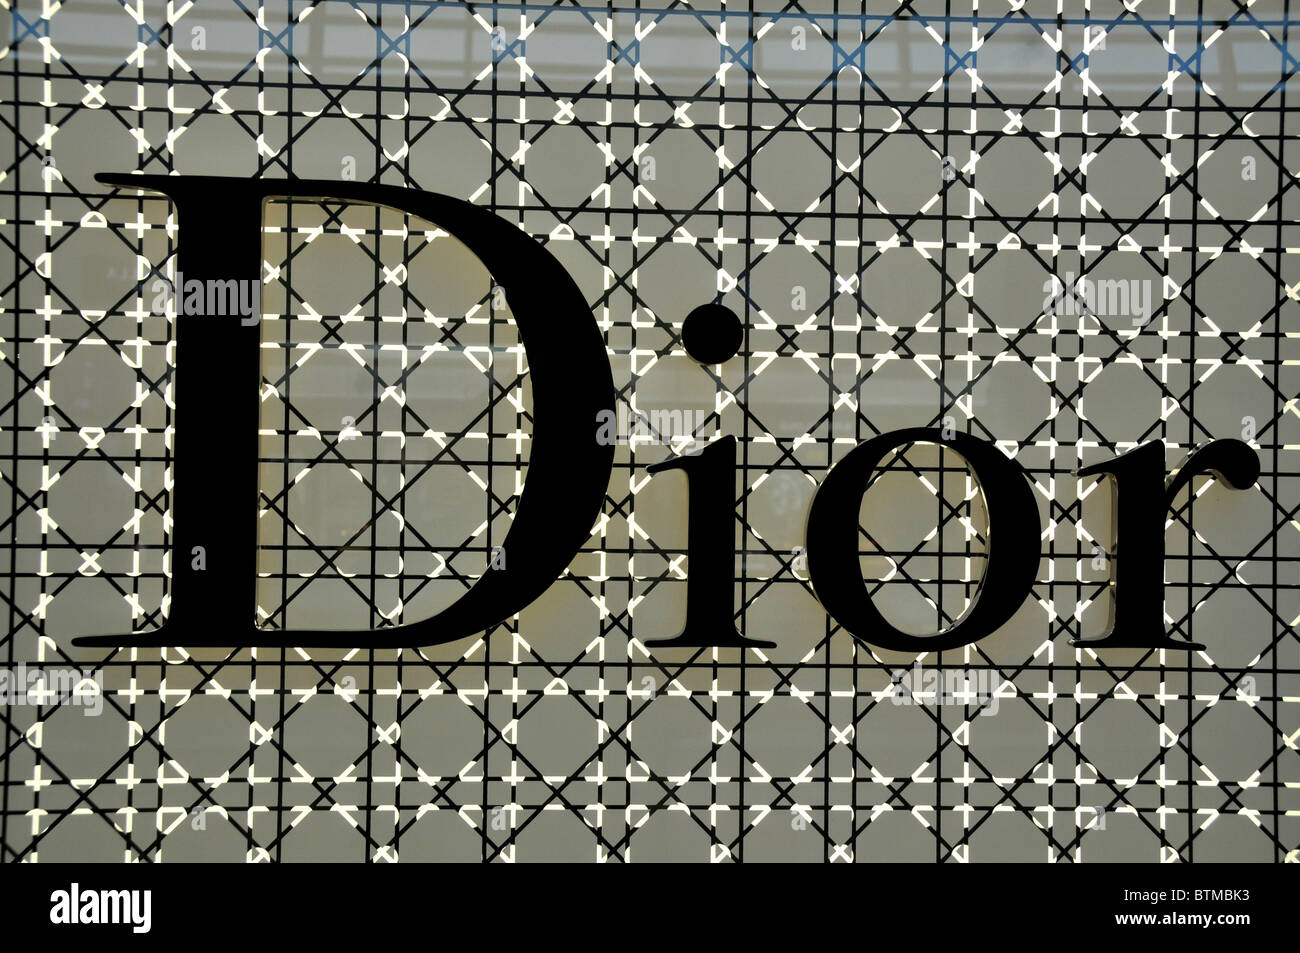 Dior Stock Vector Images - Alamy